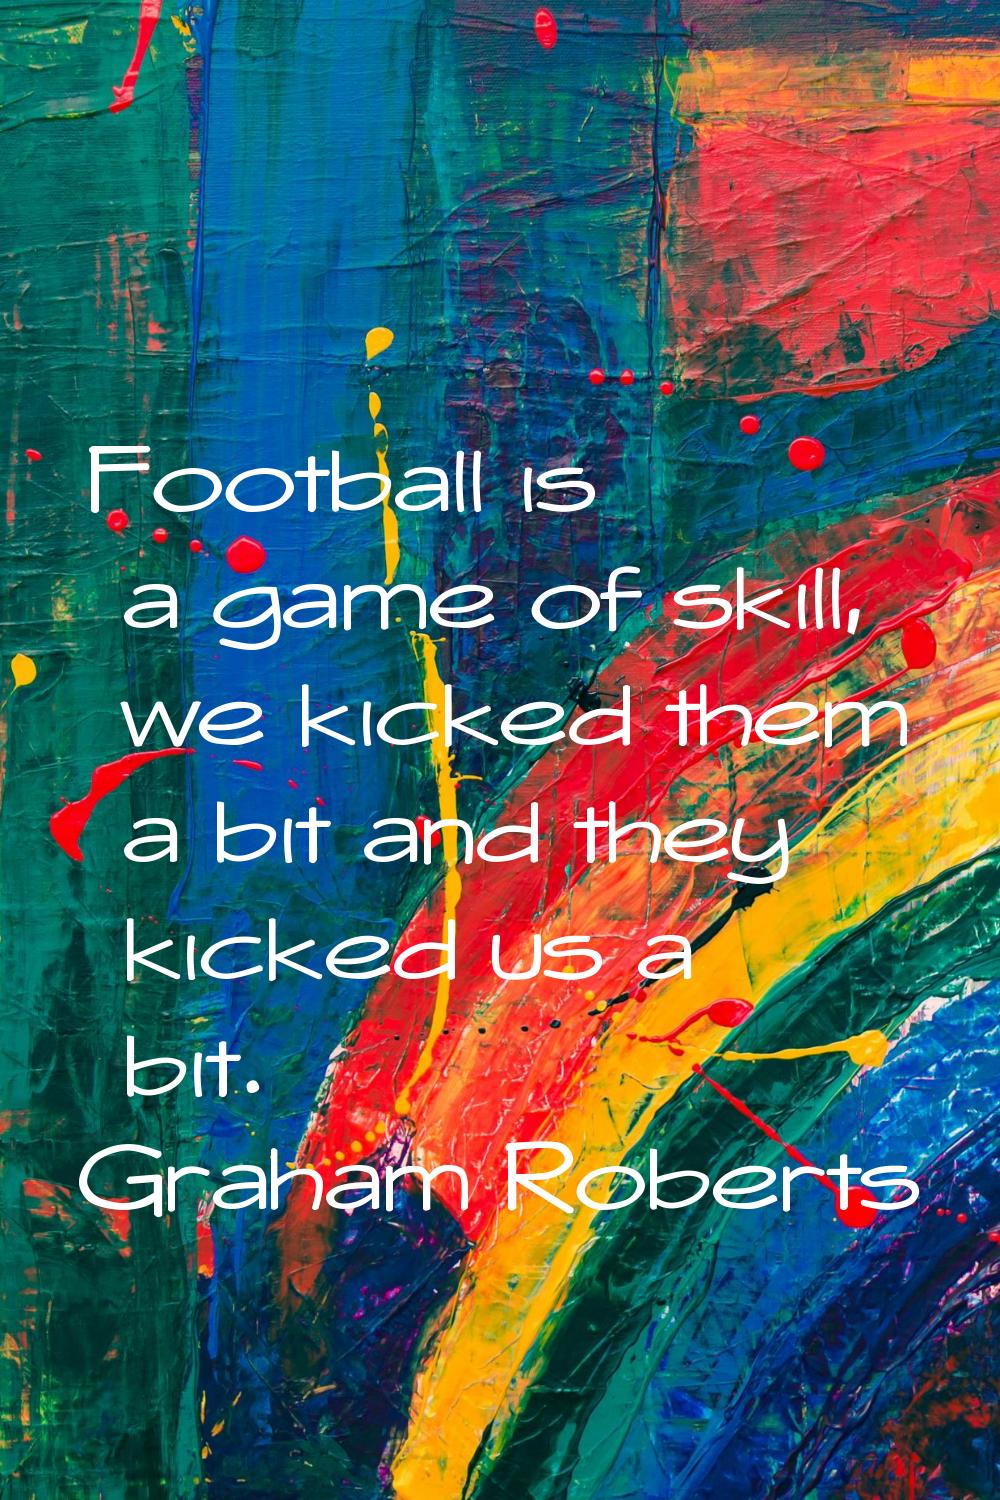 Football is a game of skill, we kicked them a bit and they kicked us a bit.